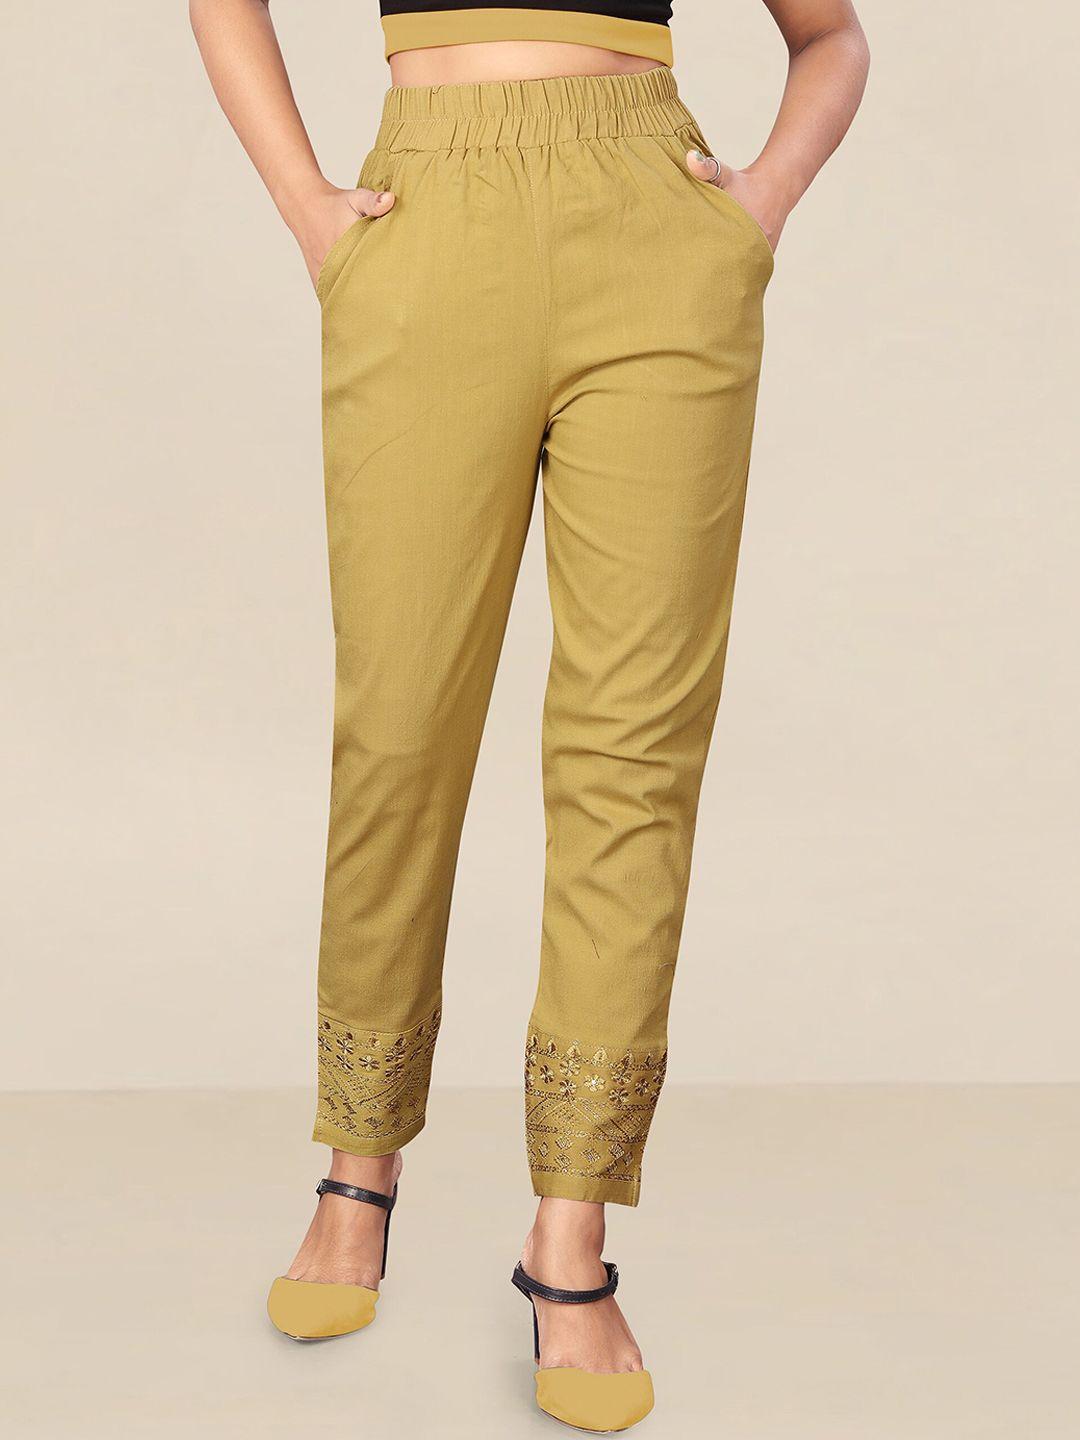 united liberty women gold-toned relaxed easy wash regular fit trousers